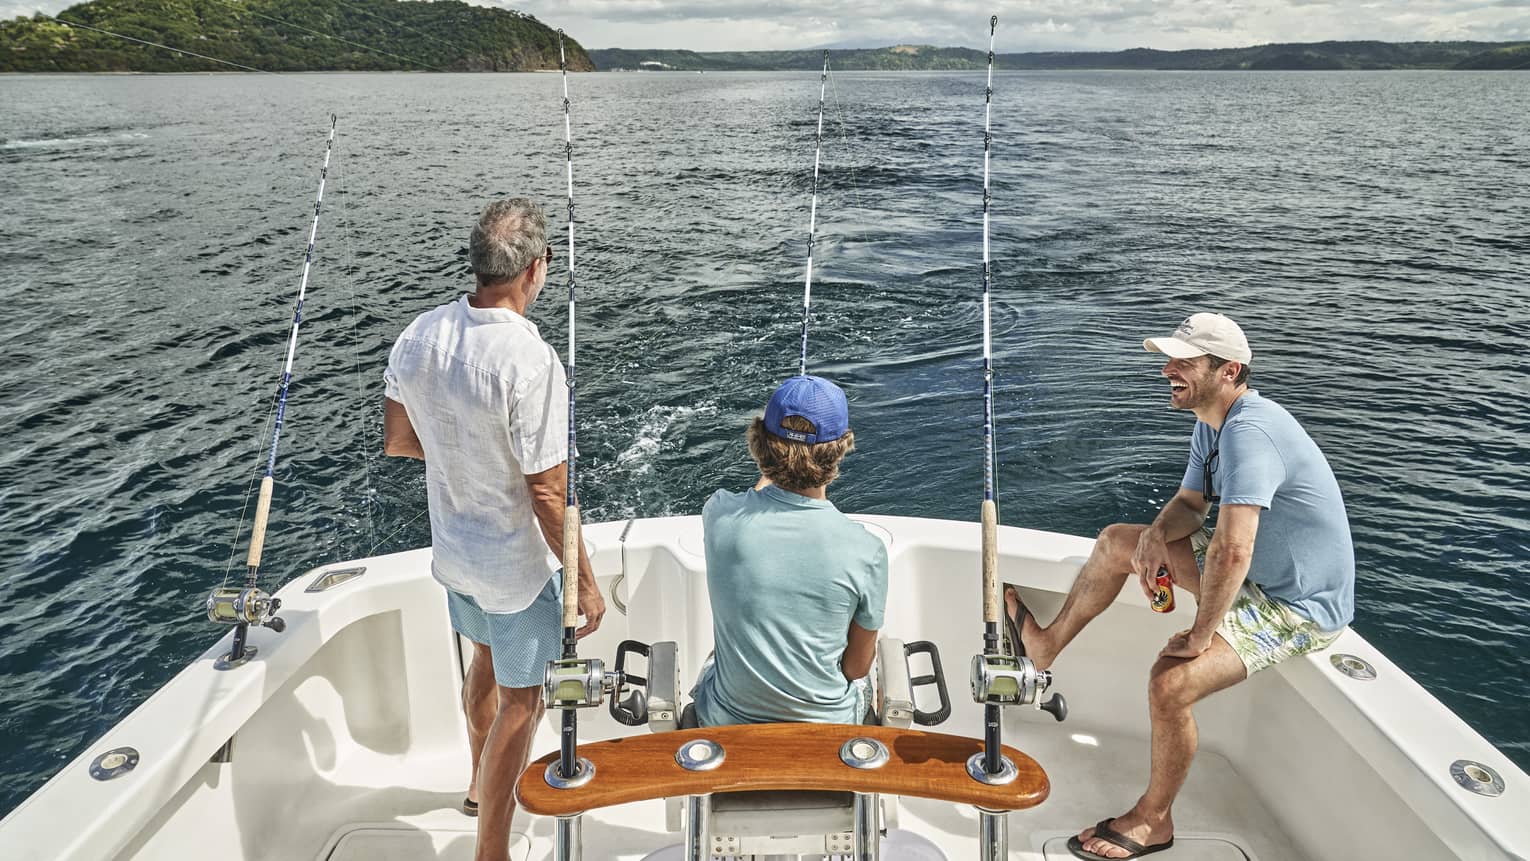 Three men of varying ages sit looking out at the water from the back of a boat outfitted with fishing rods